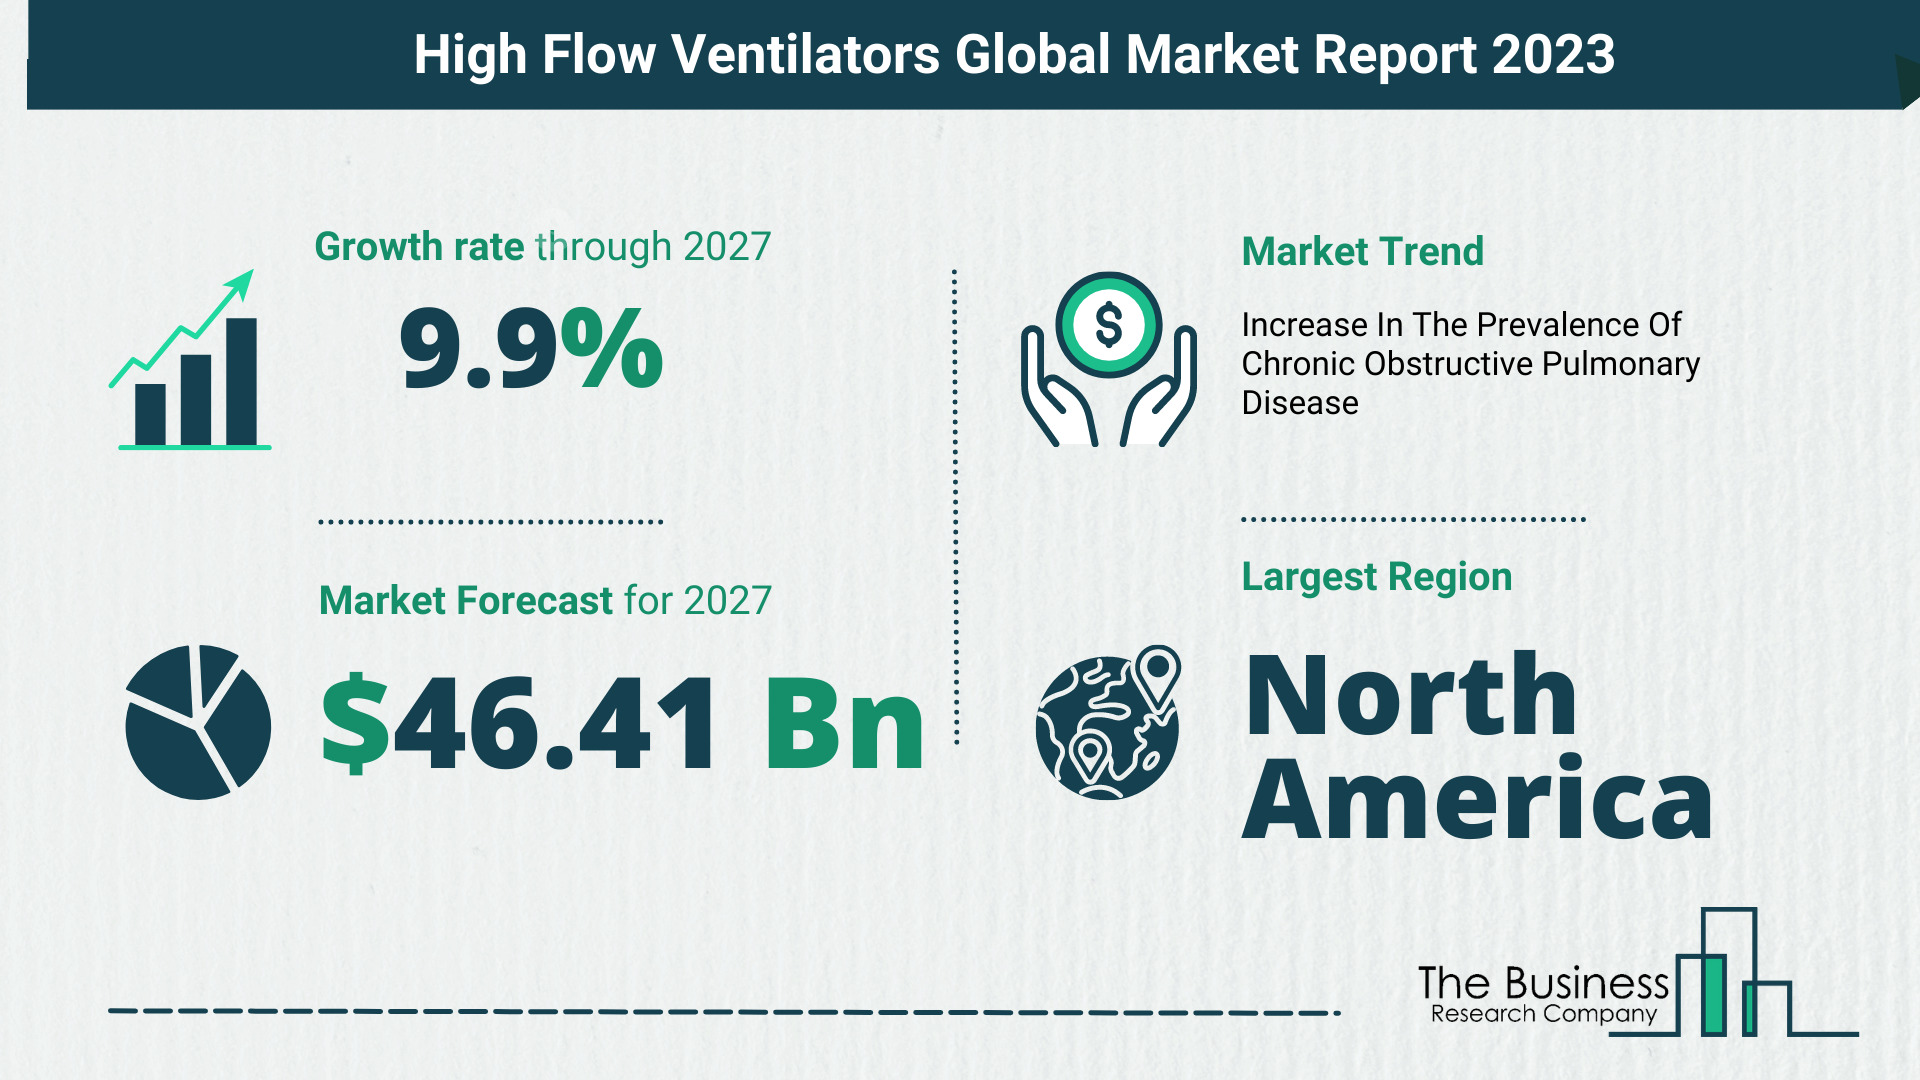 High Flow Ventilators Market Forecast 2023-2027 By The Business Research Company